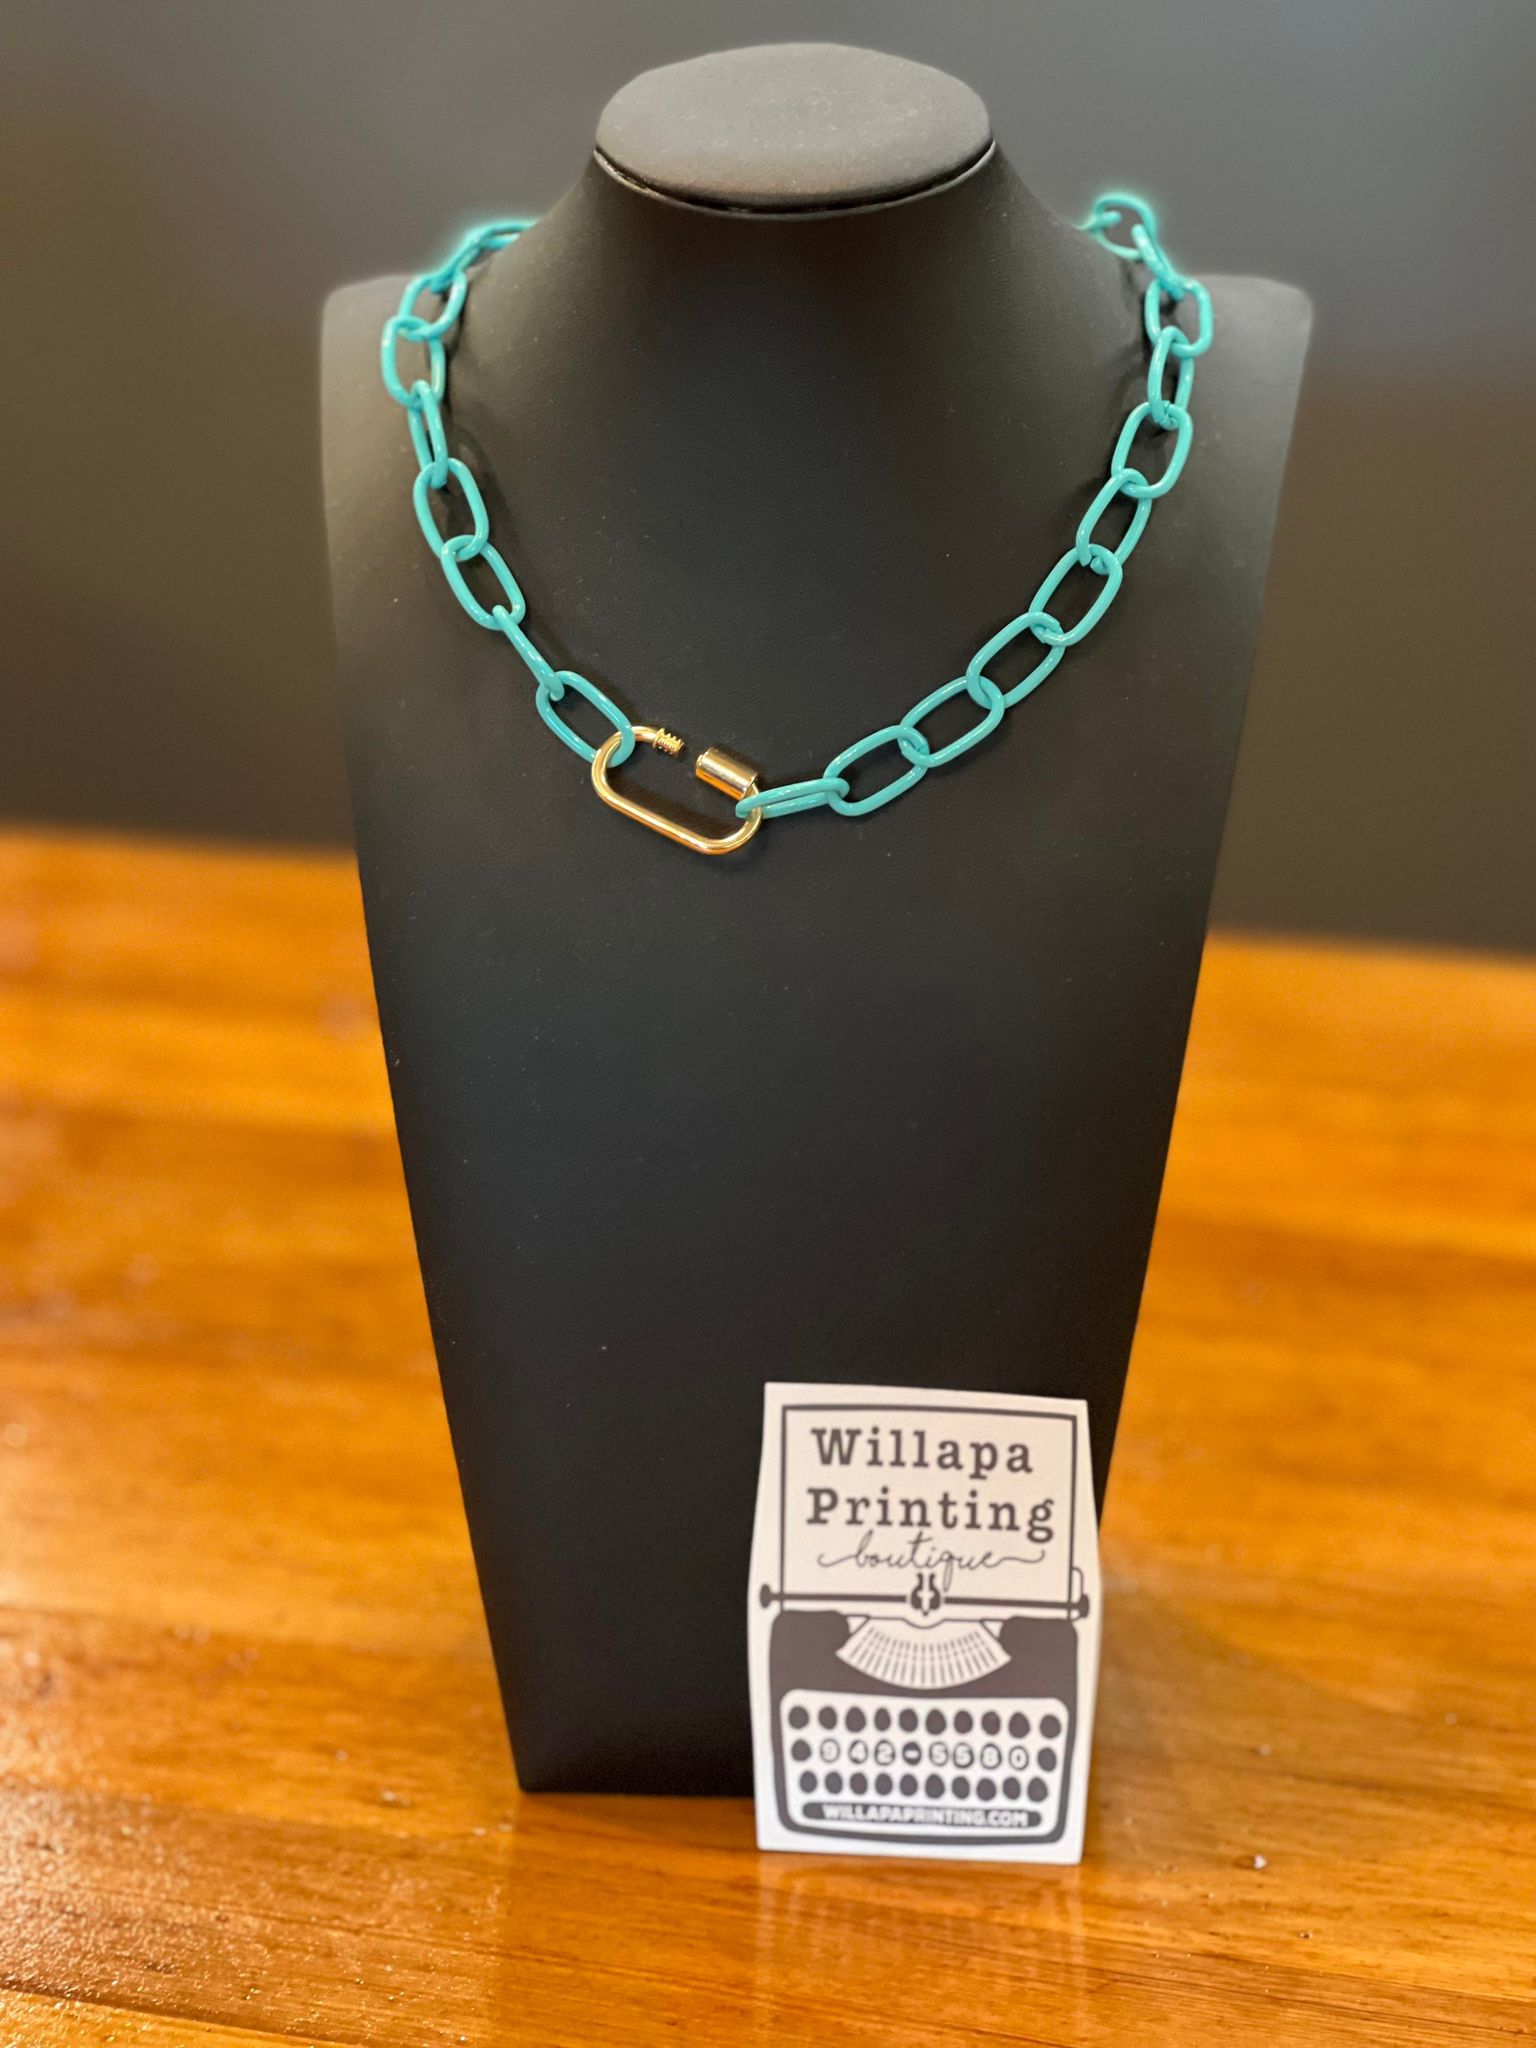 BRIGHT BLUE CHAIN LINK NECKLACE WITH CARABINER